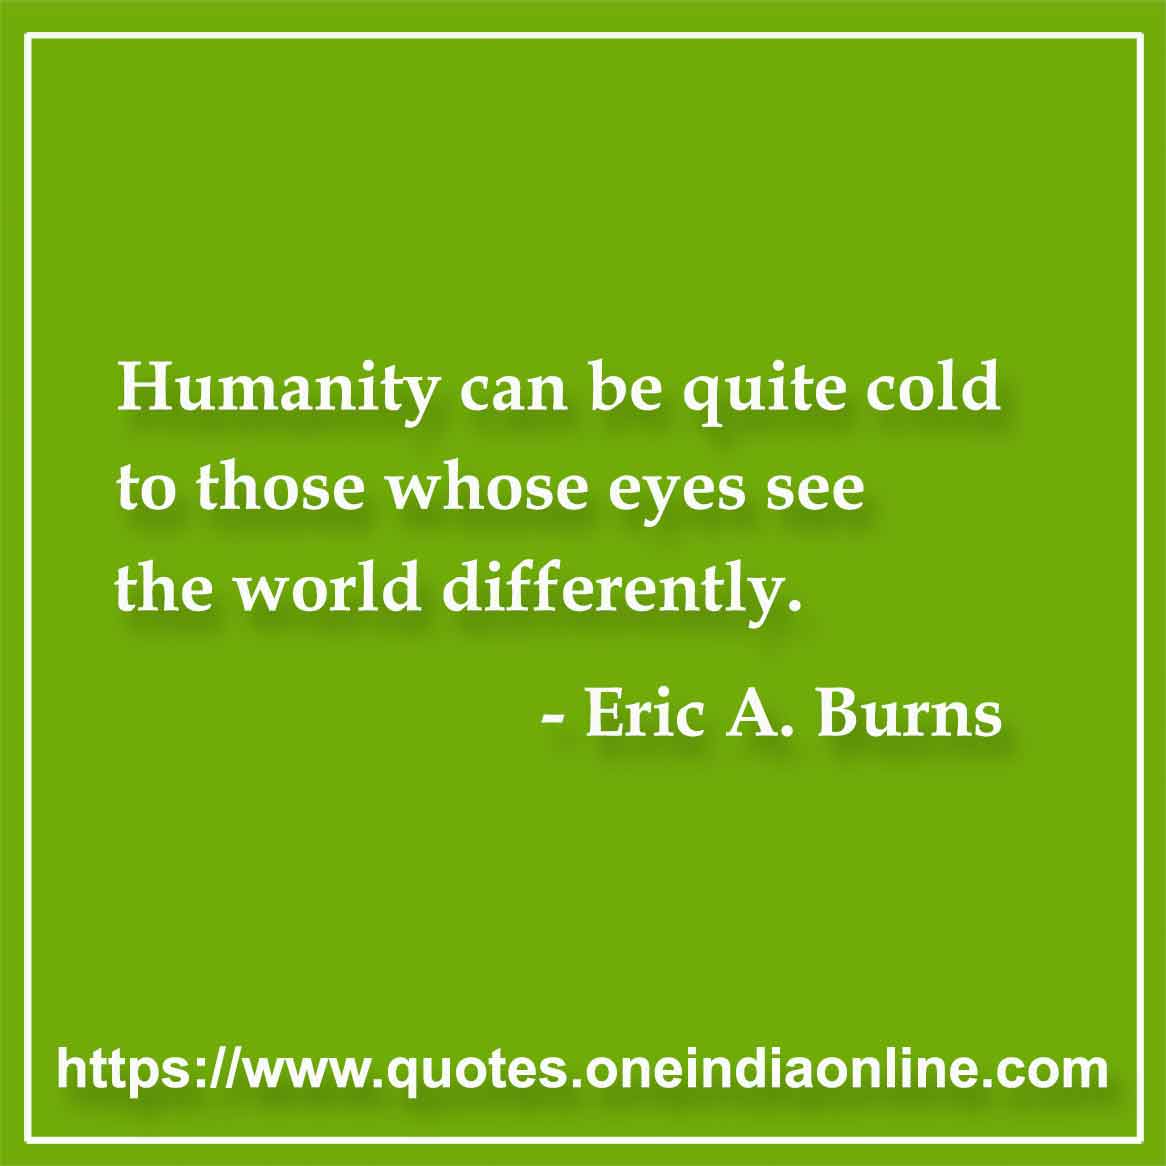 Humanity can be quite cold to those whose eyes see the world differently.

- Creativity Quotes by Eric A. Burns